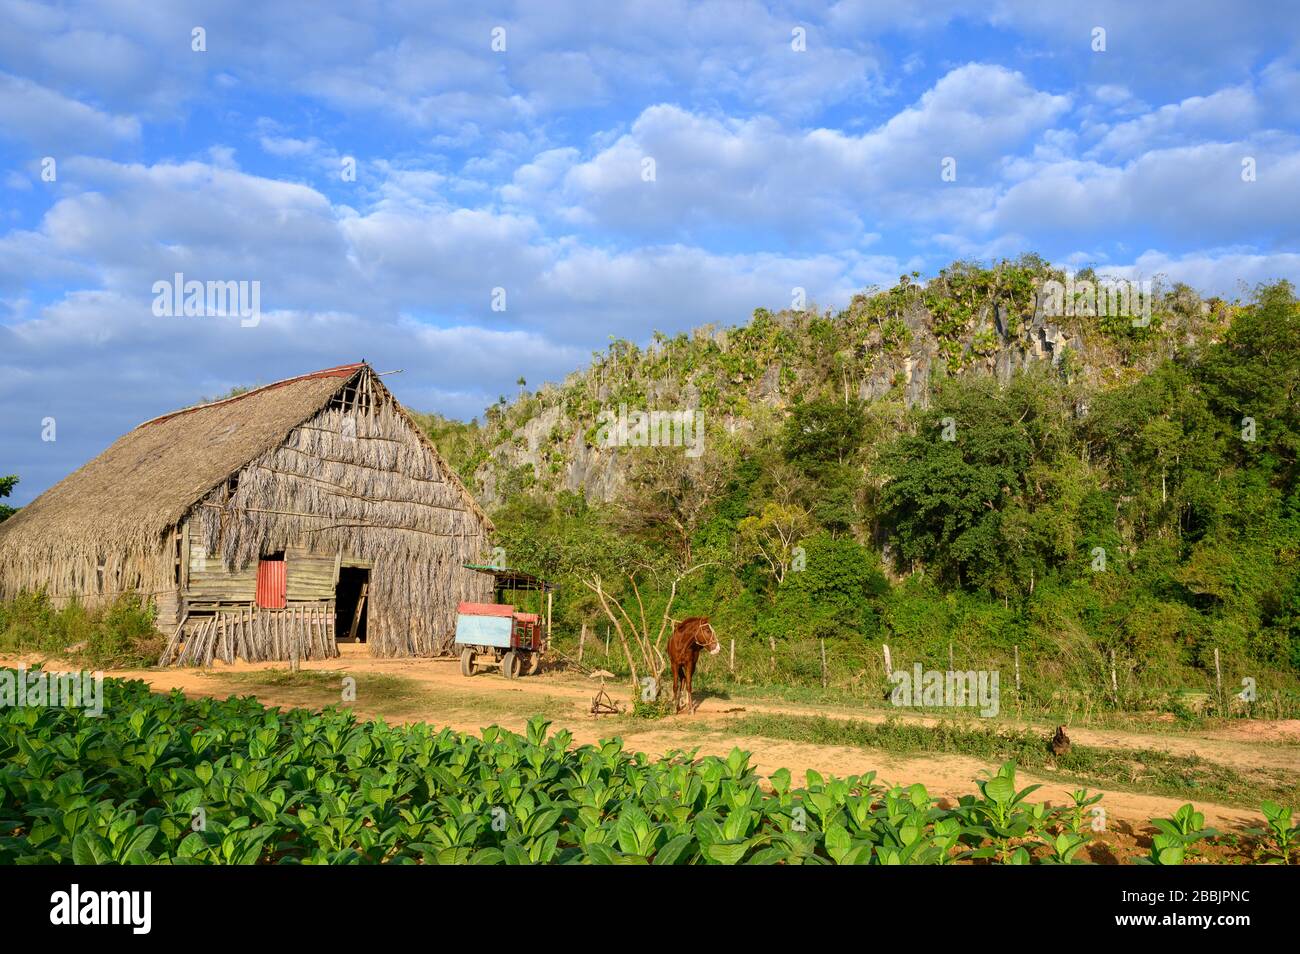 Cigar tobacco field with drying sheds, Vinales, Pinar del Rio Province, Cuba Stock Photo